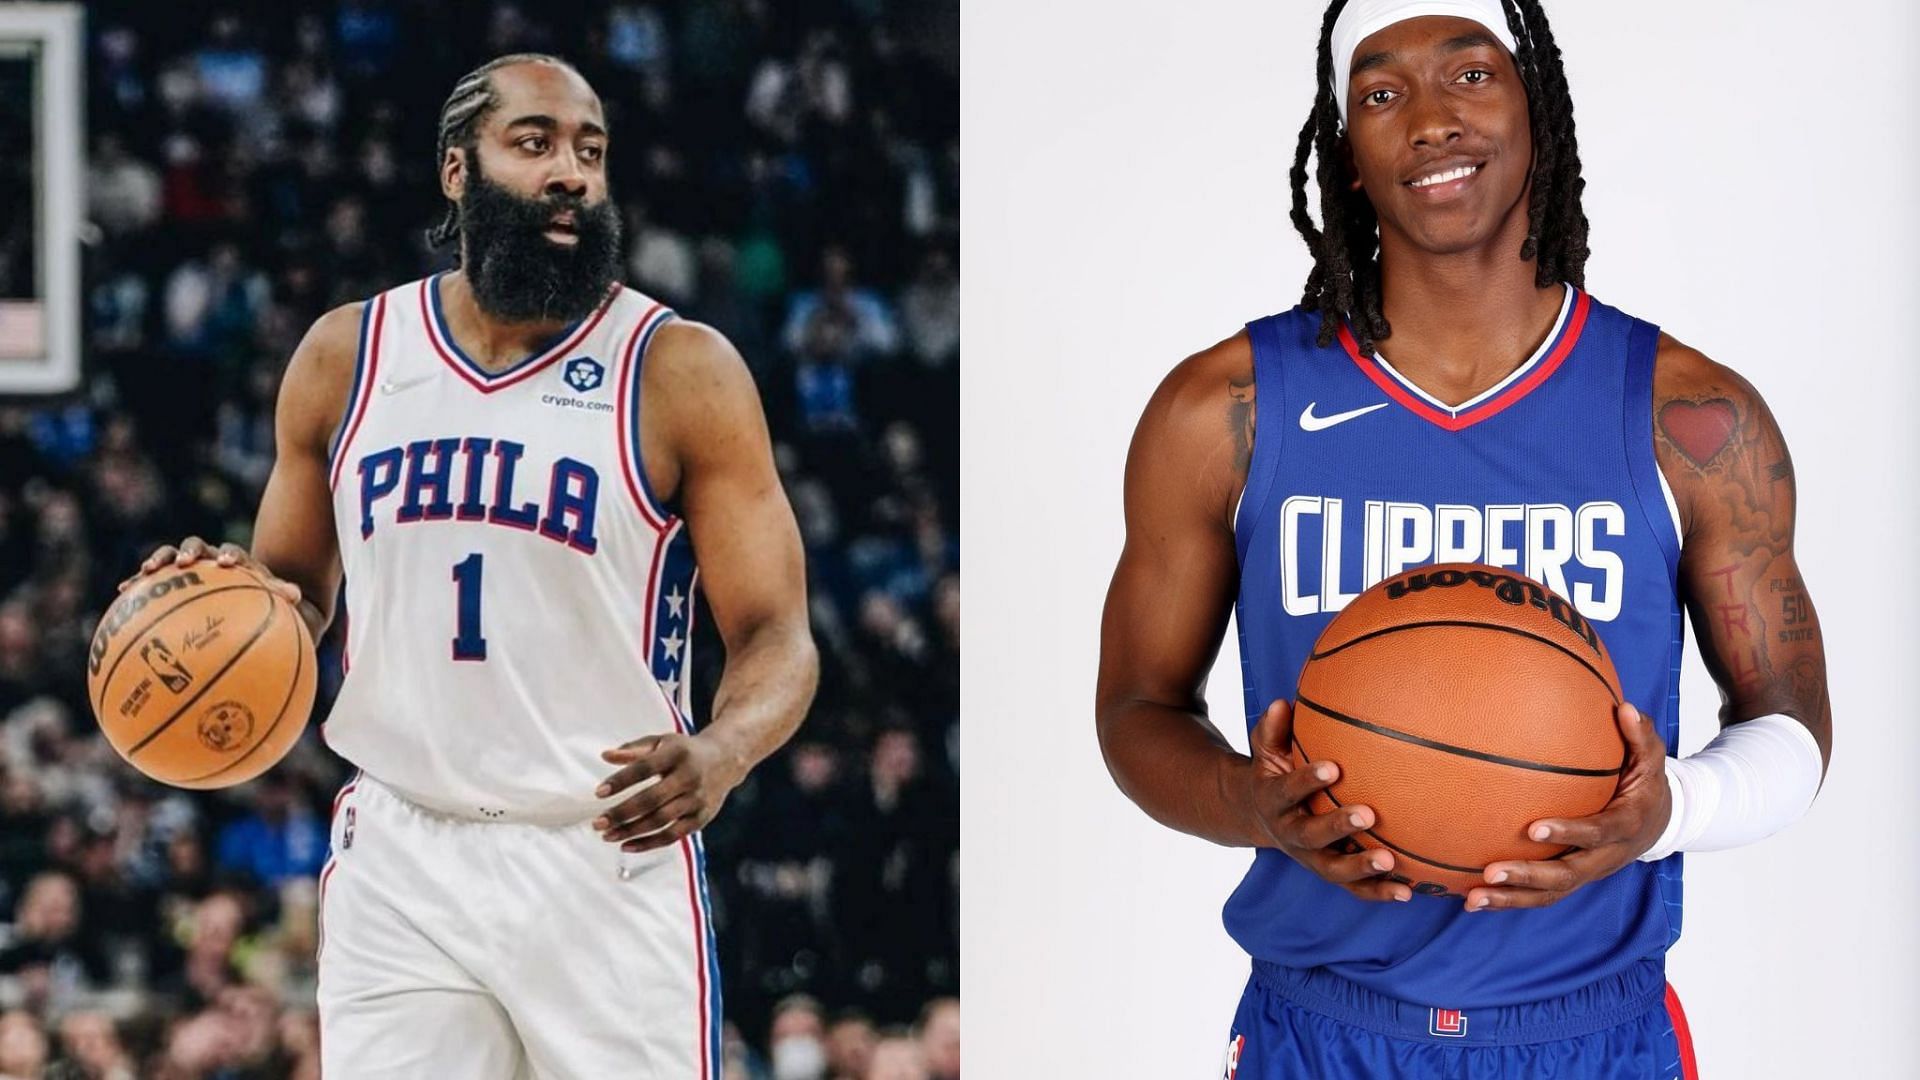 The Philadelphia 76ers reportedly want Clippers to include Terance Mann in package for James Harden